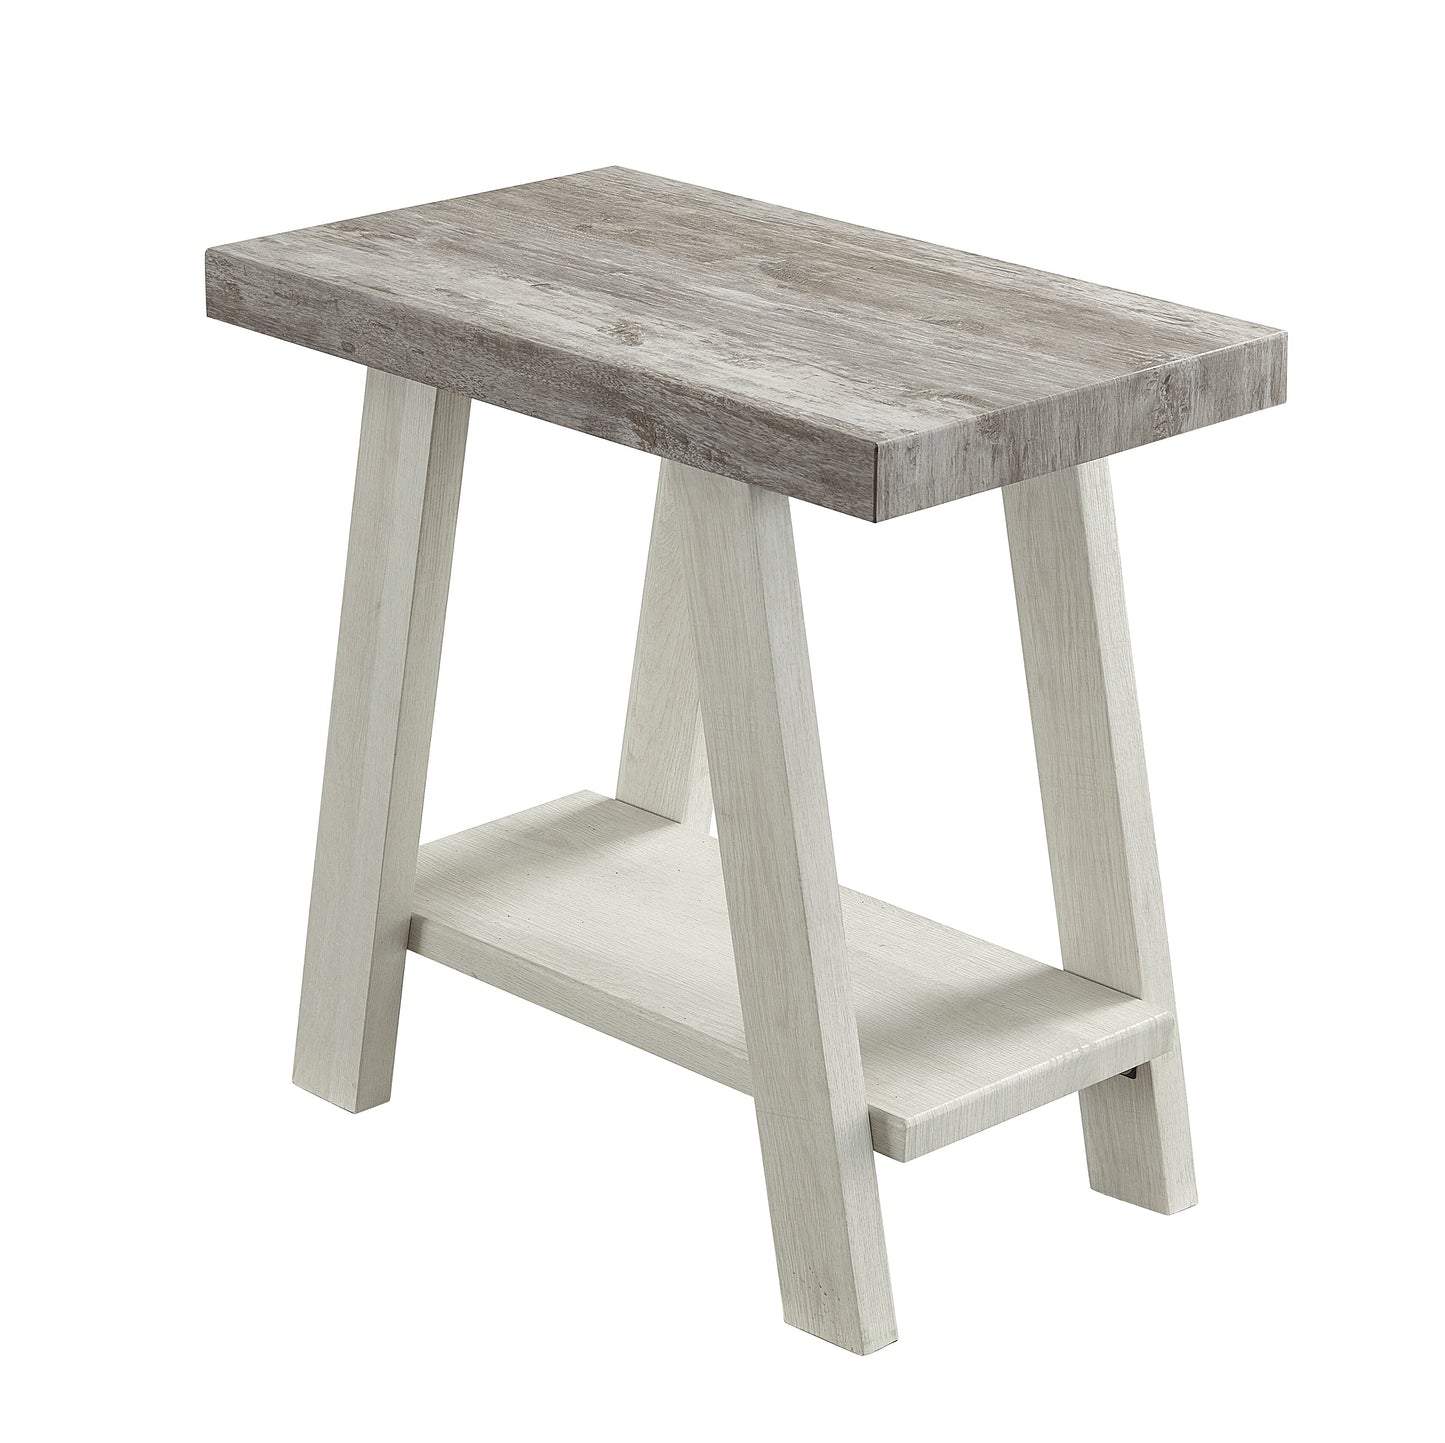 Athens Contemporary Two-Tone Wood Shelf Side Table in Weathered Gray and Beige